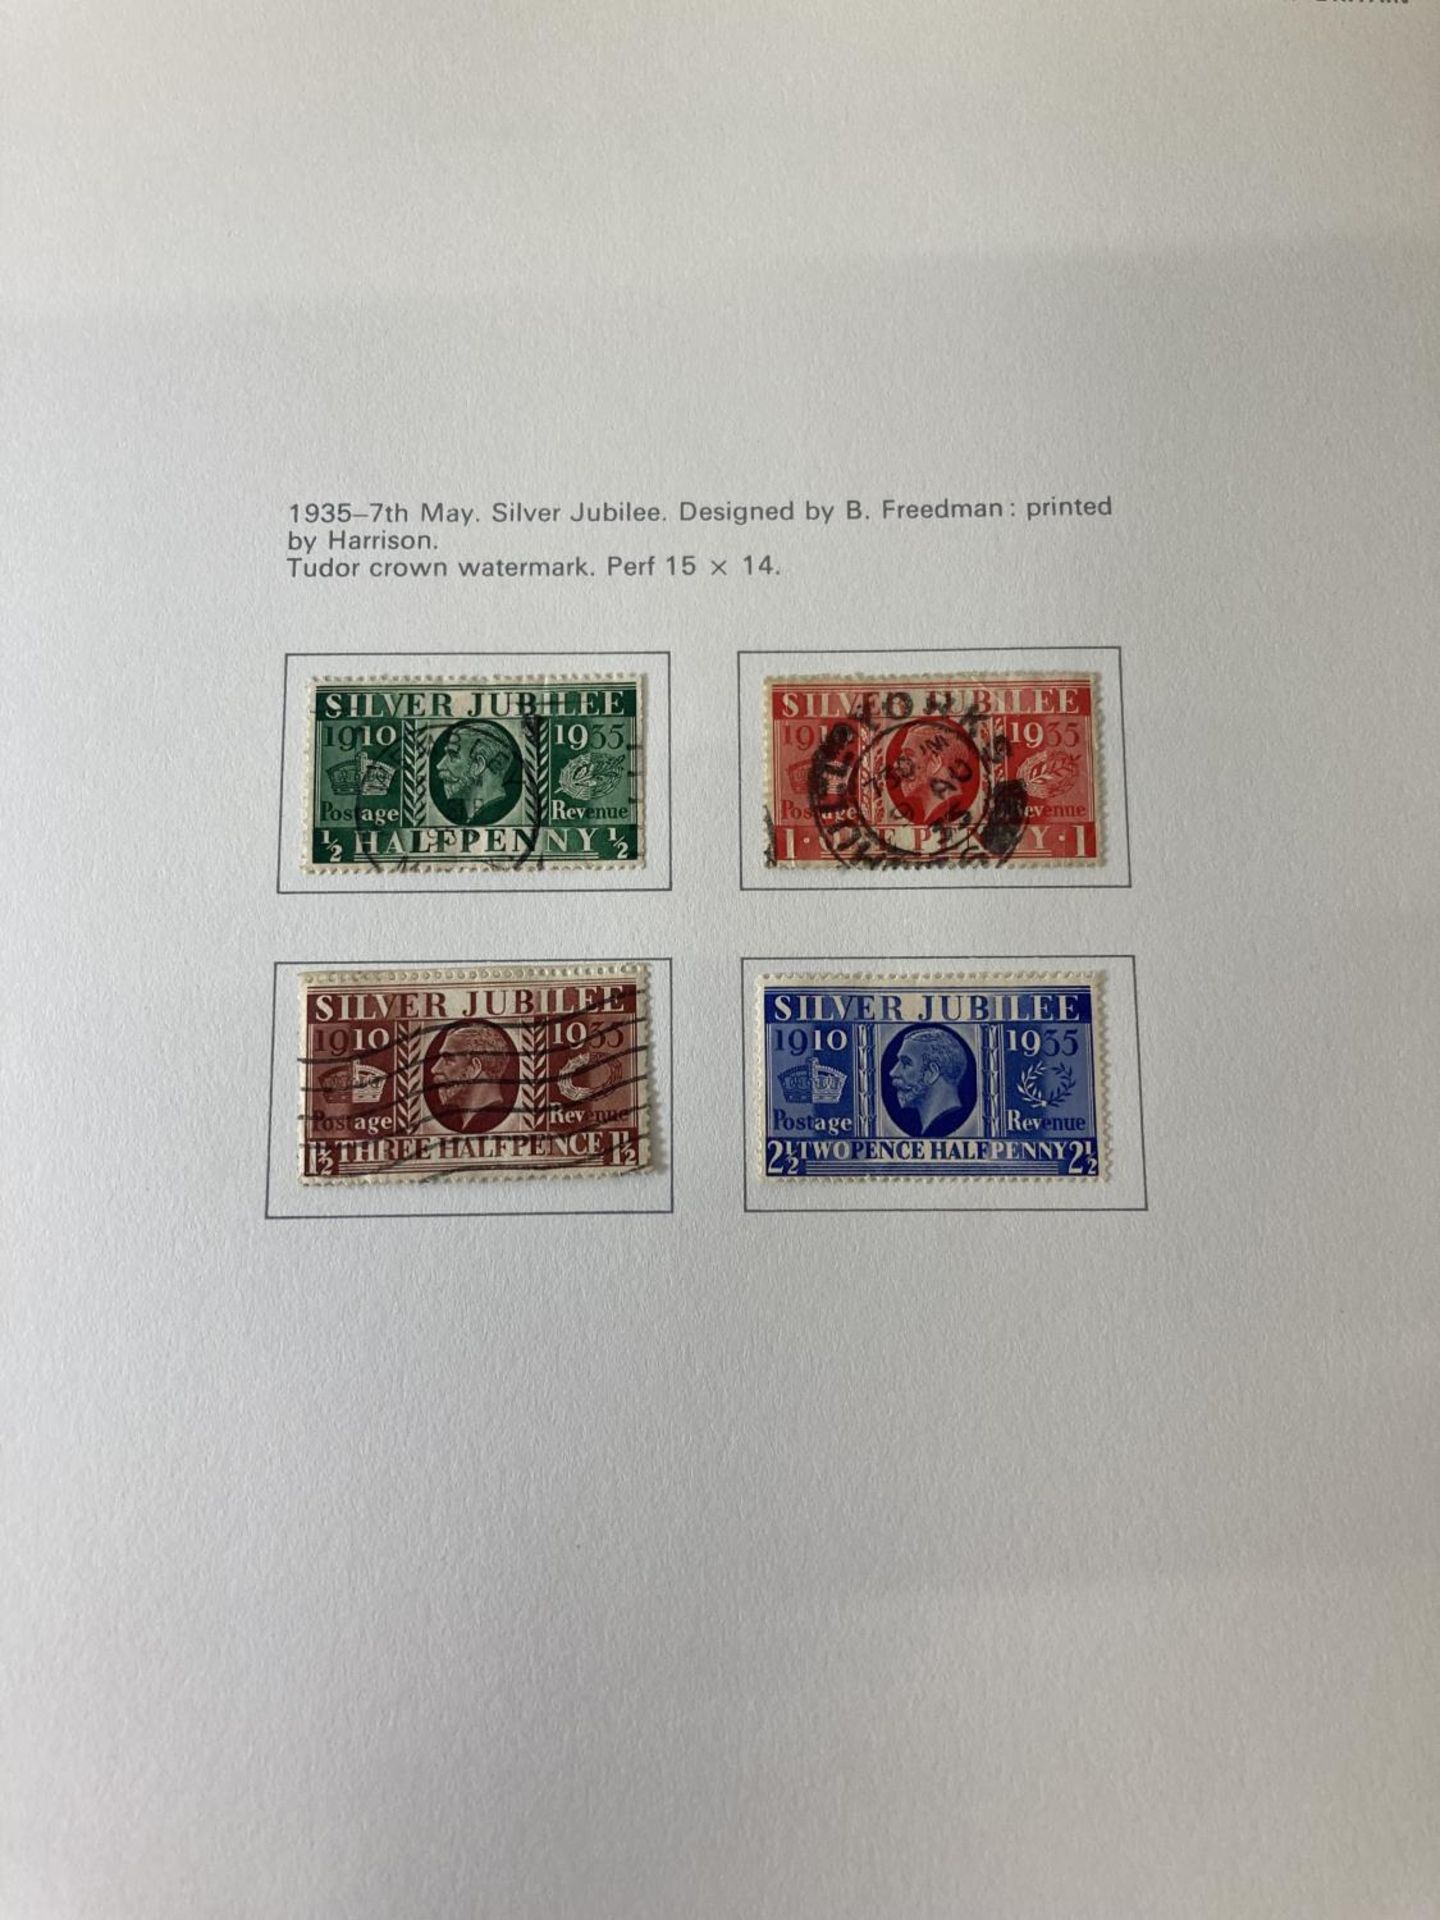 TWO BLUE STAMP ALBUMS CONTAINING STAMPS OF GREAT BRITAIN 1840 TO 1951 AND 1952 TO 1971 - Image 3 of 7